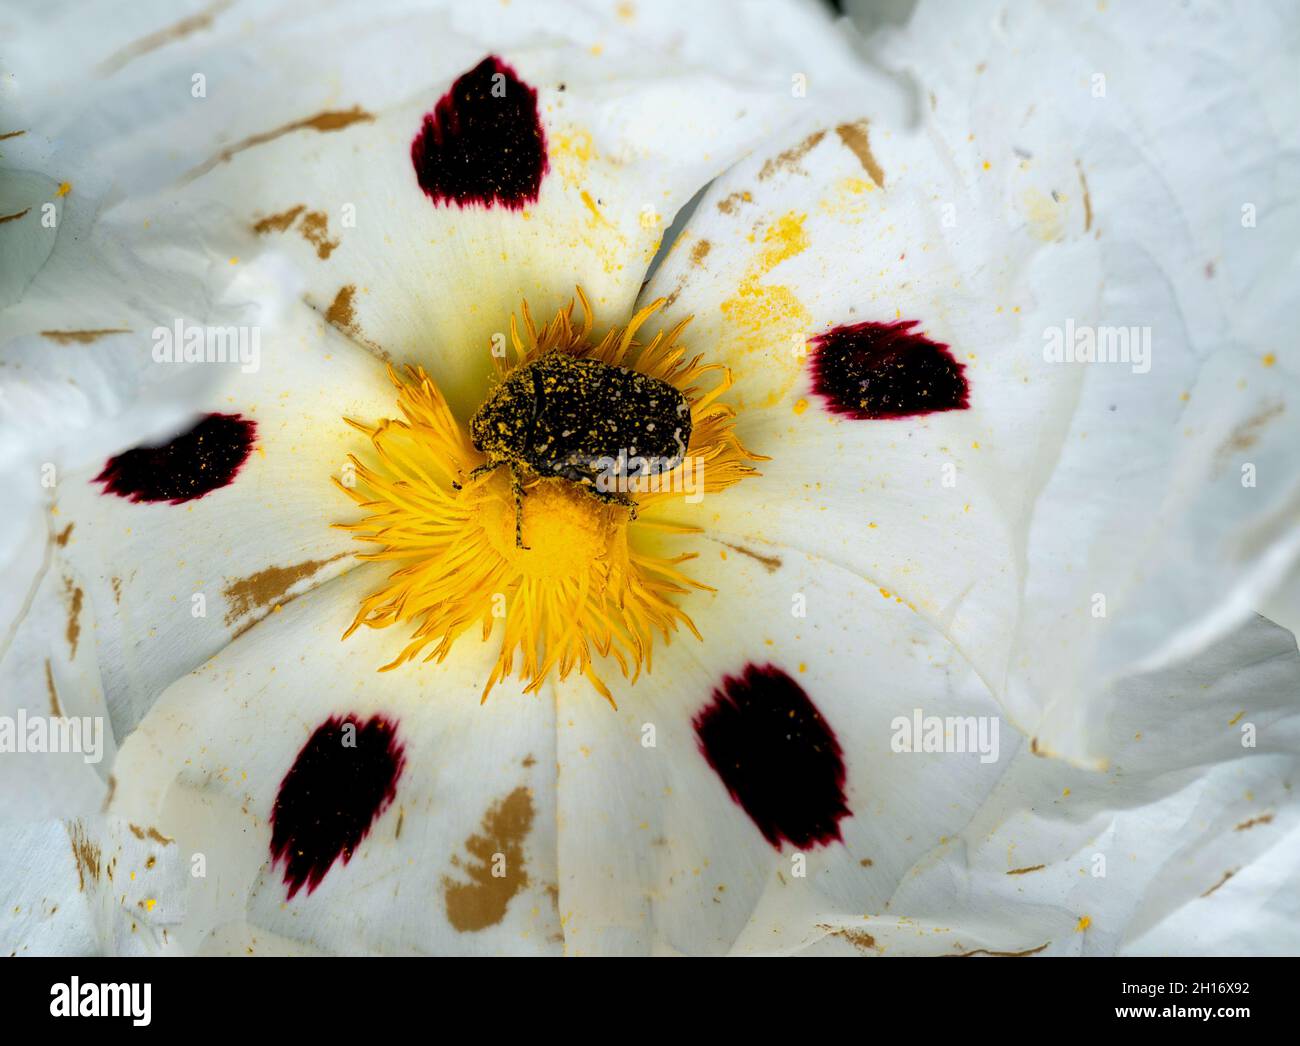 A small beetle insect covered with yellow pollen is resting on a petal of a yellow flower. Stock Photo